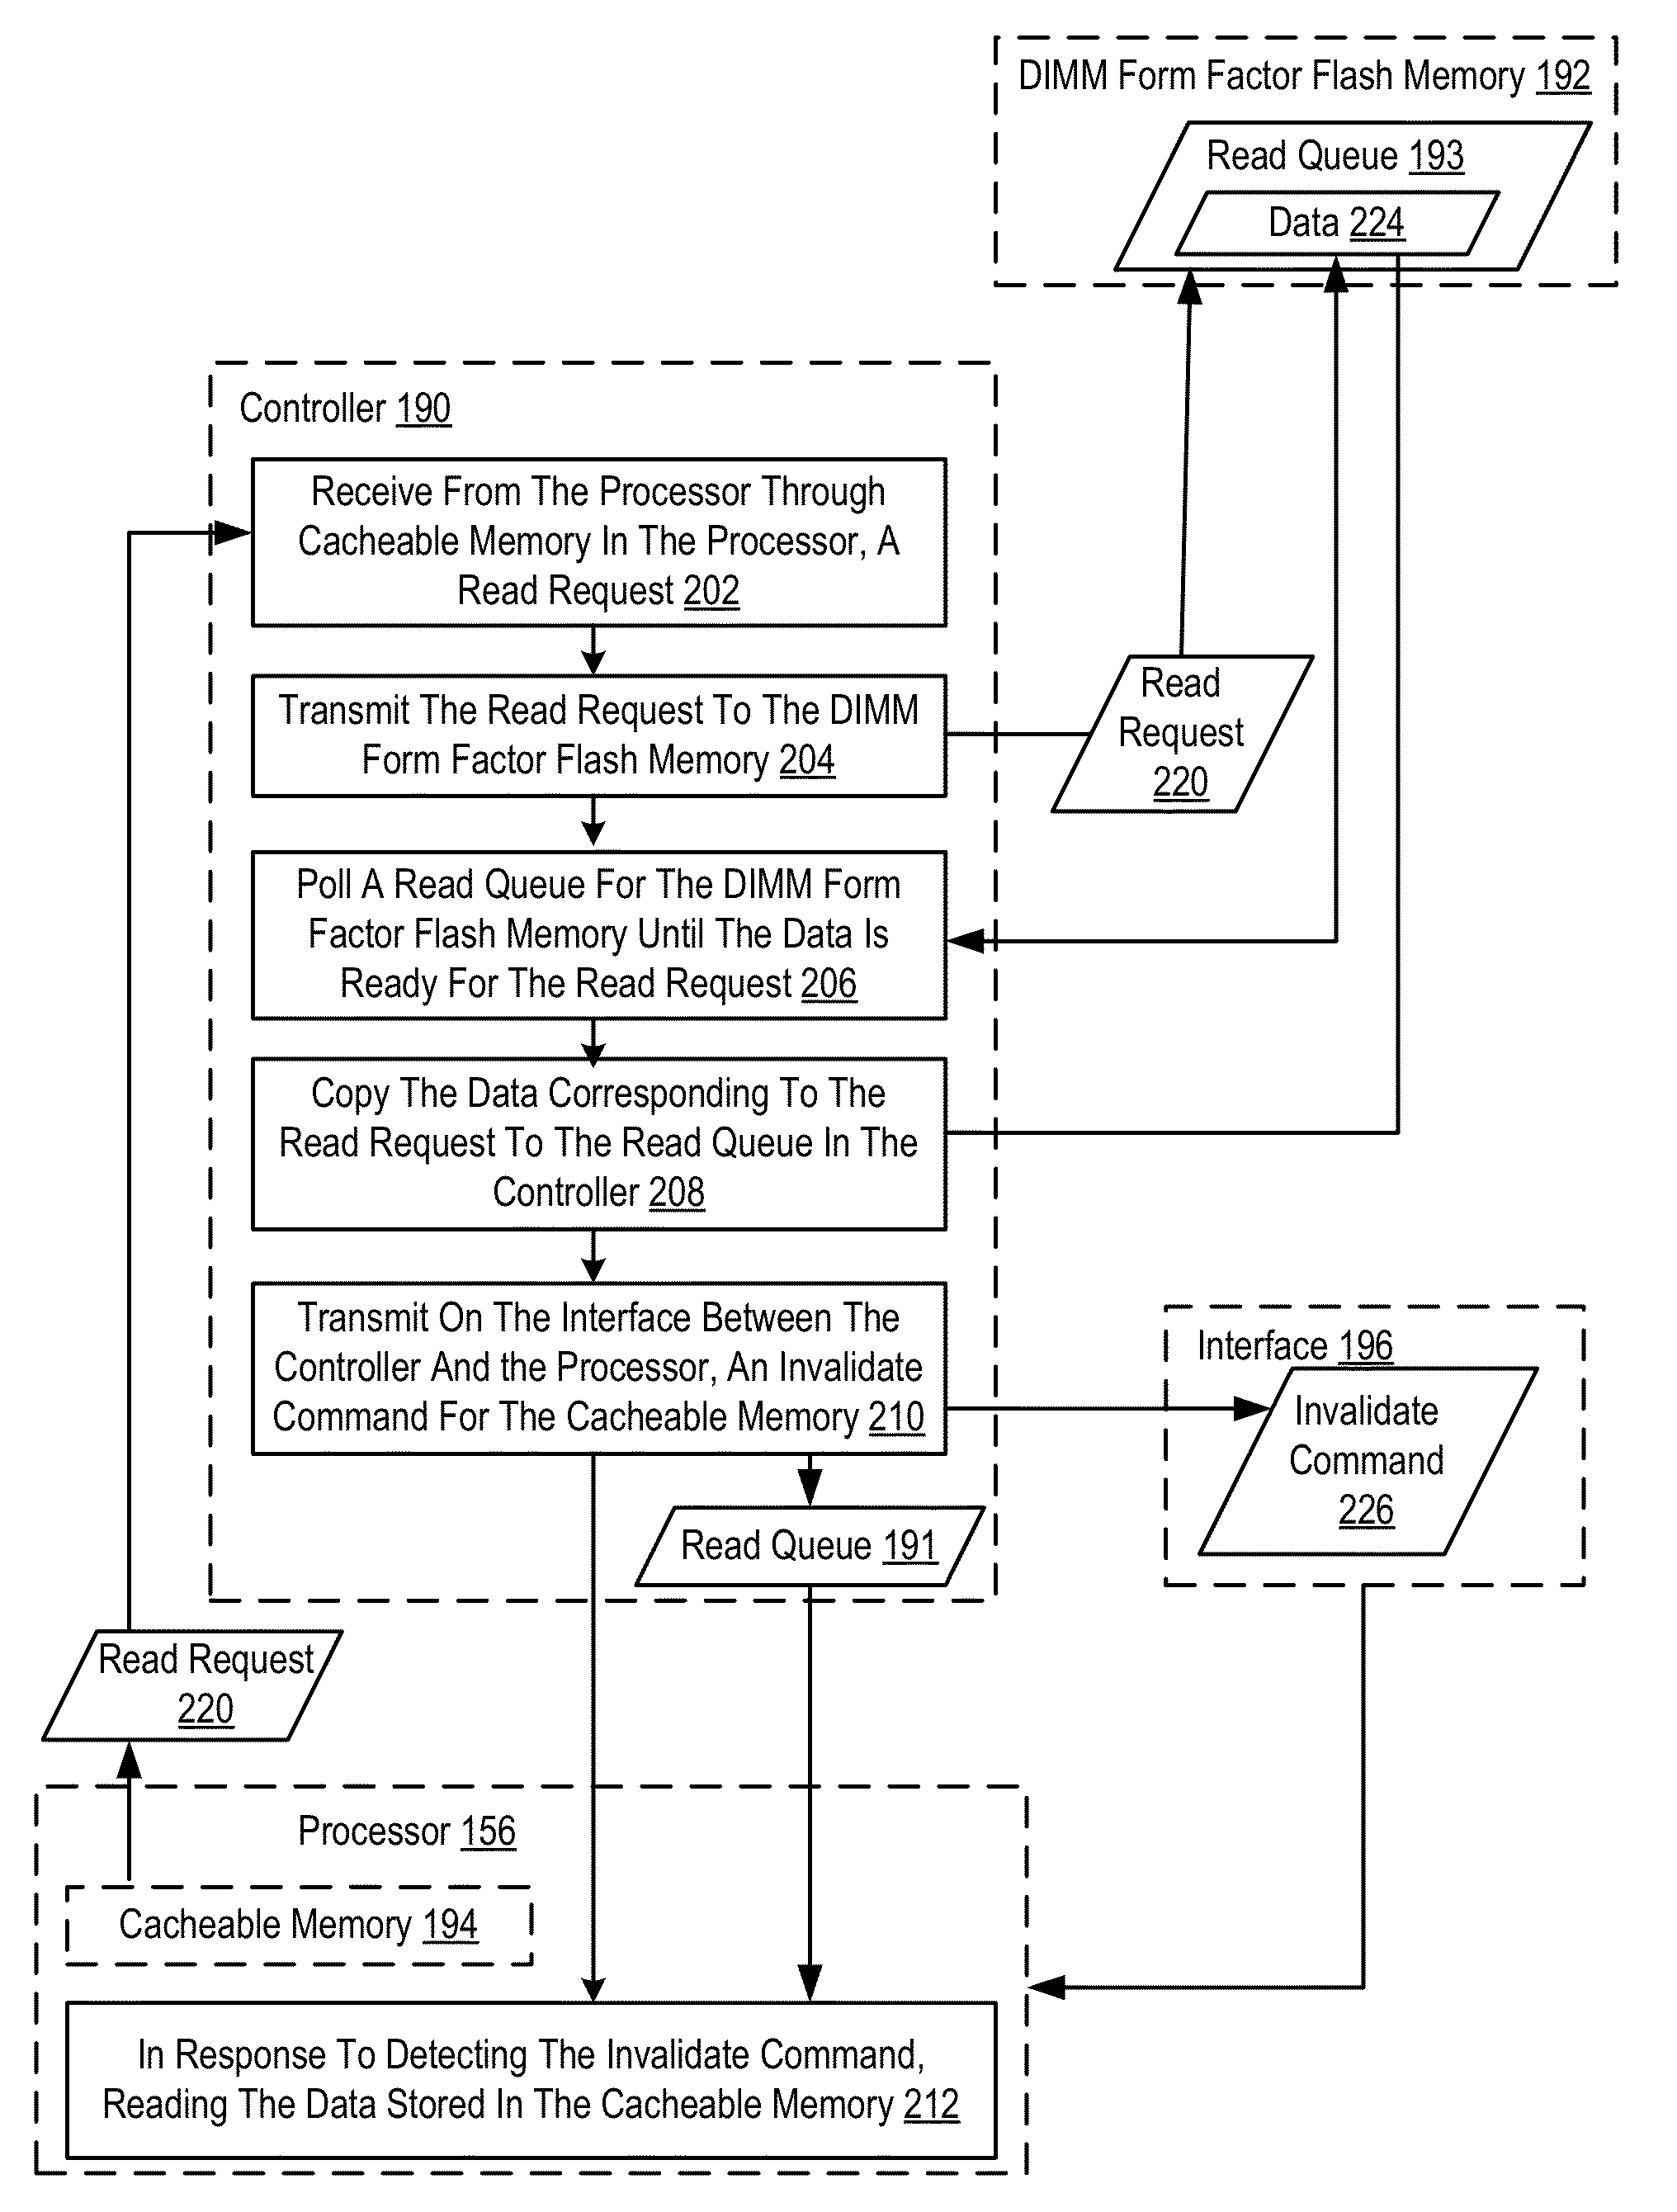 Memory access to a dual in-line memory module form factor flash memory